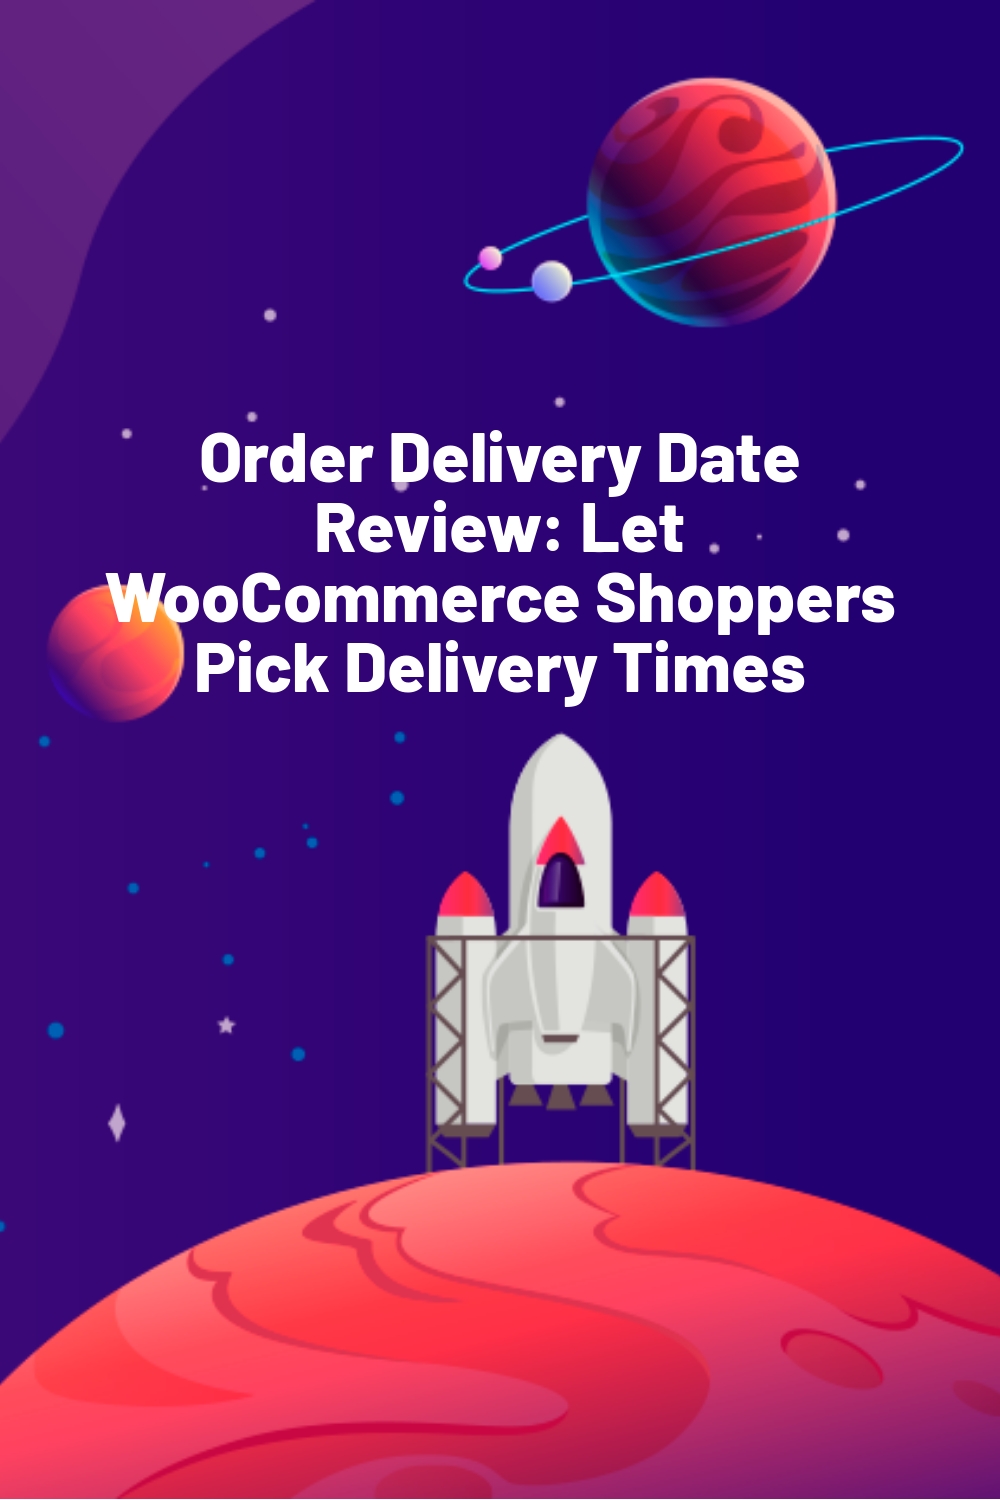 Order Delivery Date Review: Let WooCommerce Shoppers Pick Delivery Times